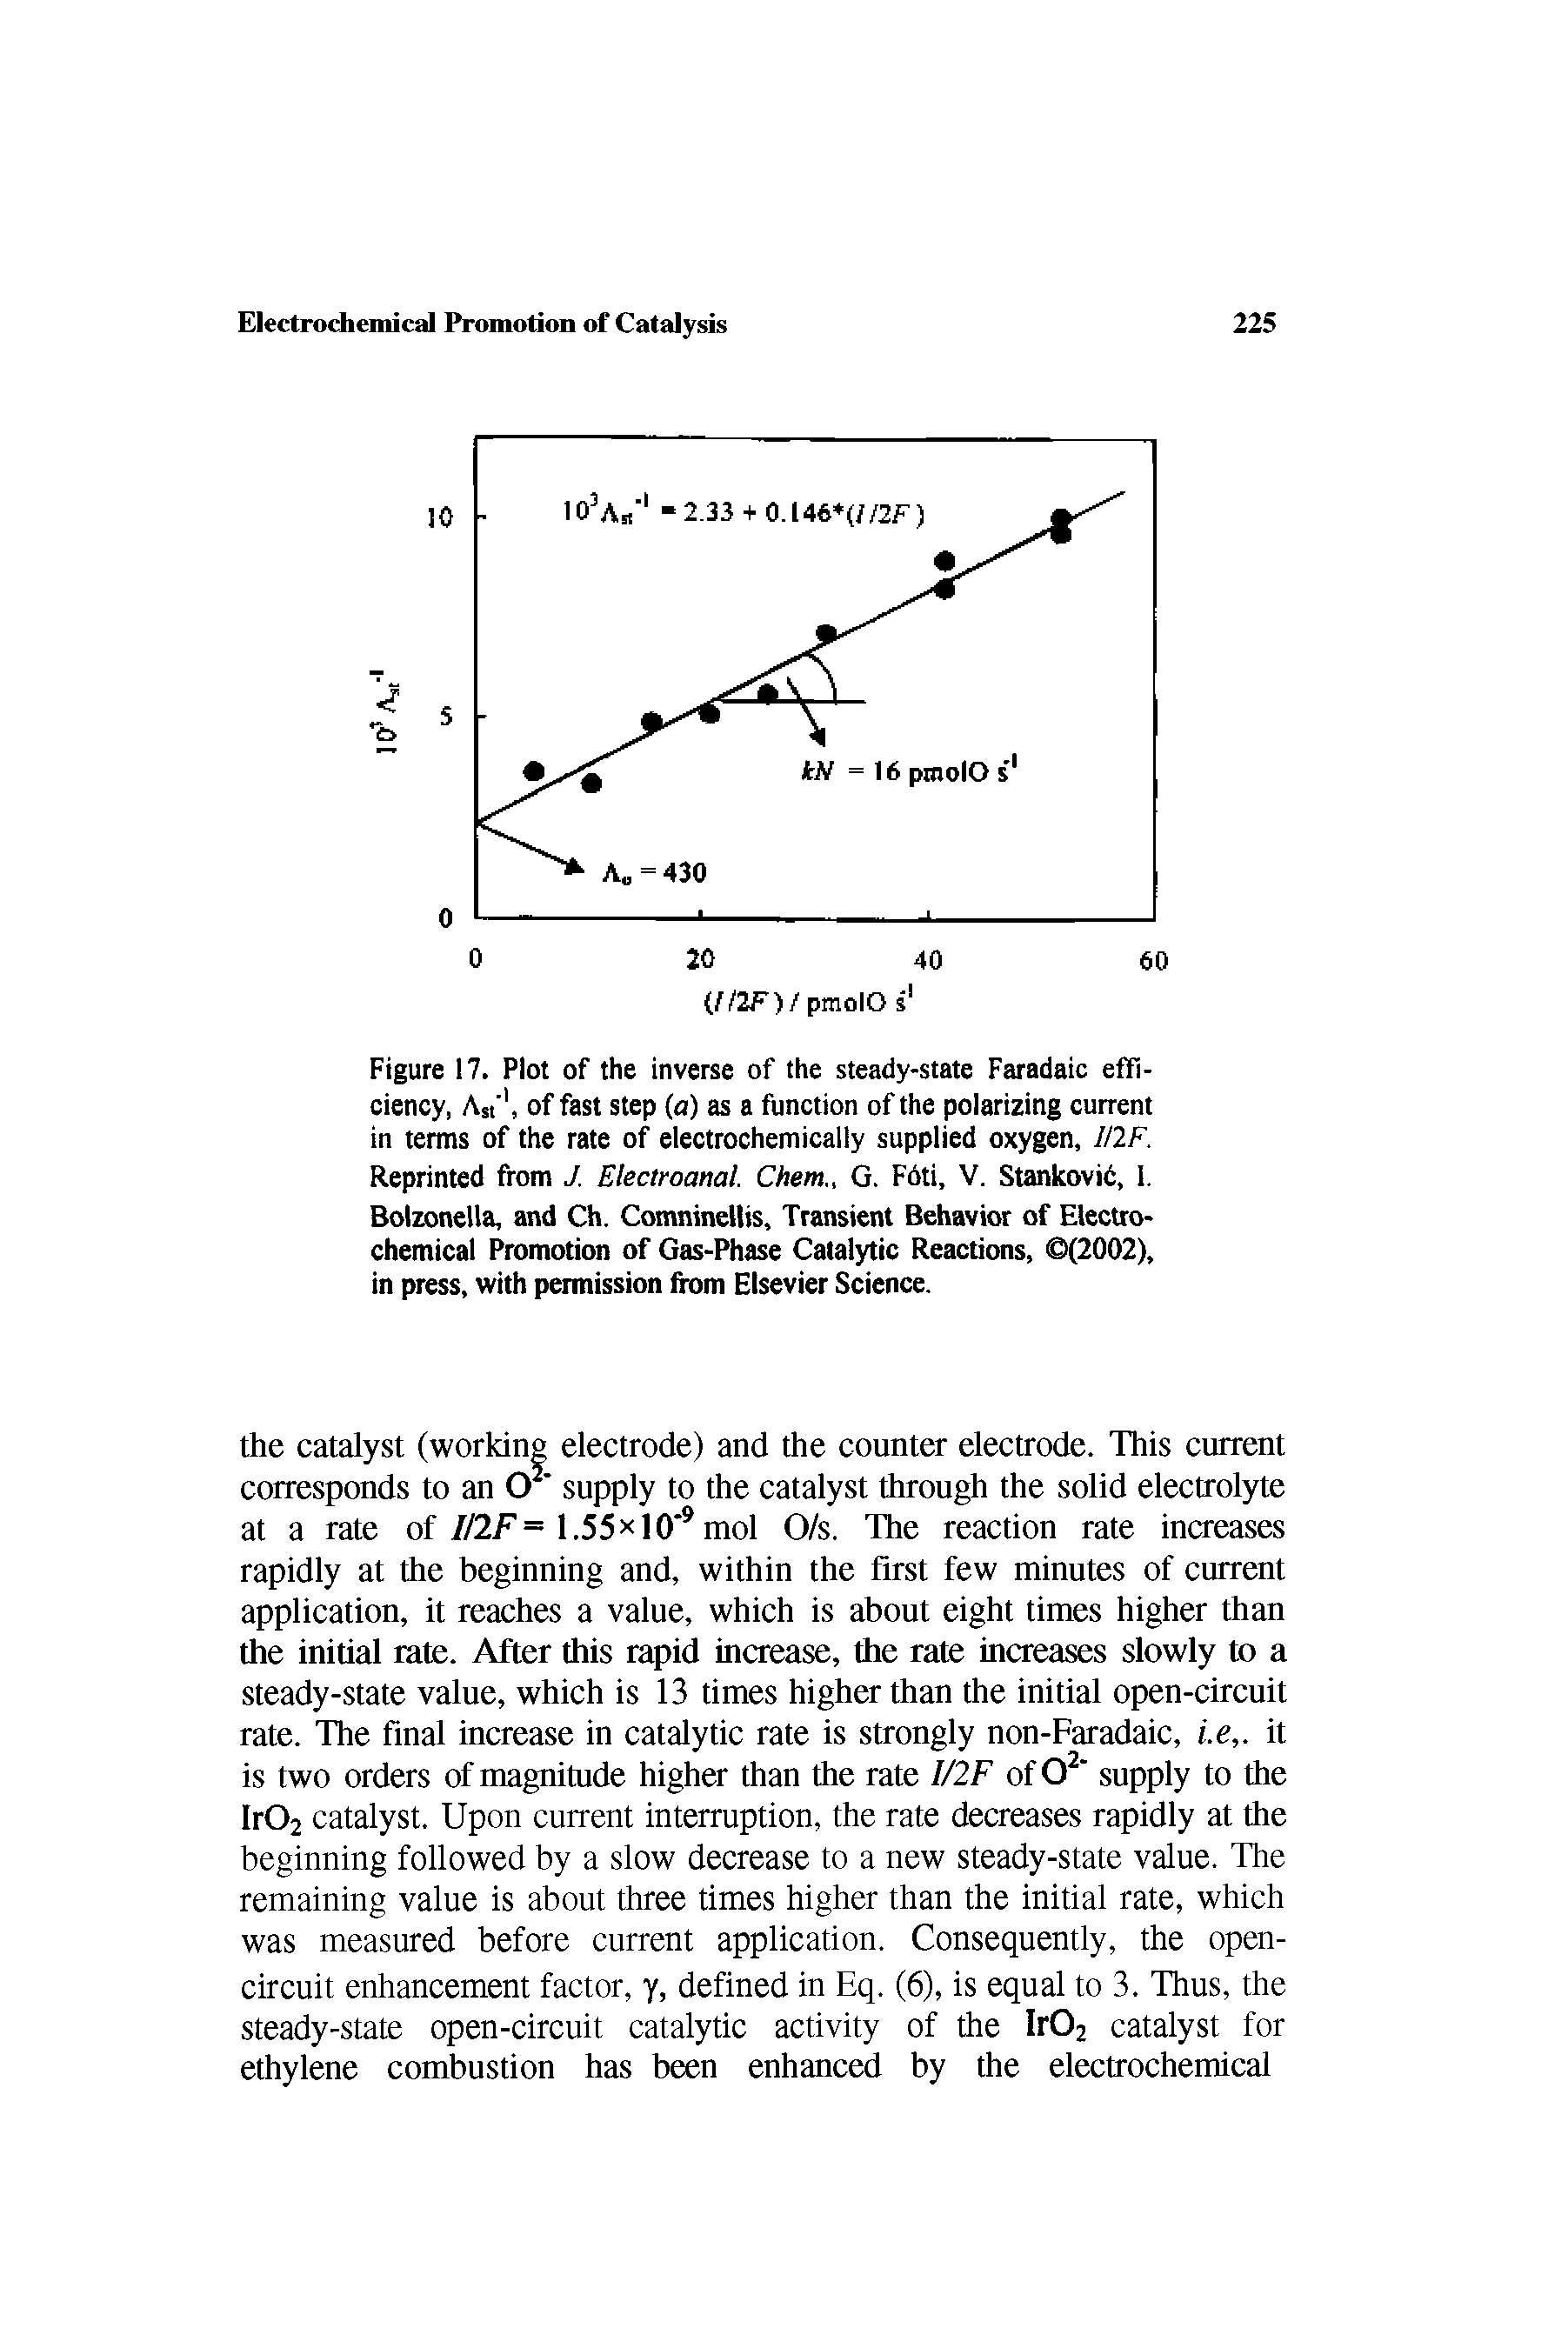 Figure 17. Plot of the inverse of the steady-state Faradaic efficiency, Ast", of fast step (a) as a function of the polarizing current in terms of the rate of electrochemically supplied oxygen, H2F. Reprinted from J. Electroanal. Chem., G. F6ti, V. Stankovid, 1. Bolzonella, and Ch. Comninellis, Transient Behavior of Electrochemical Promotion of Gas-Phase Catalytic Reactions, (2002), in press, with permission liom Elsevier Science.